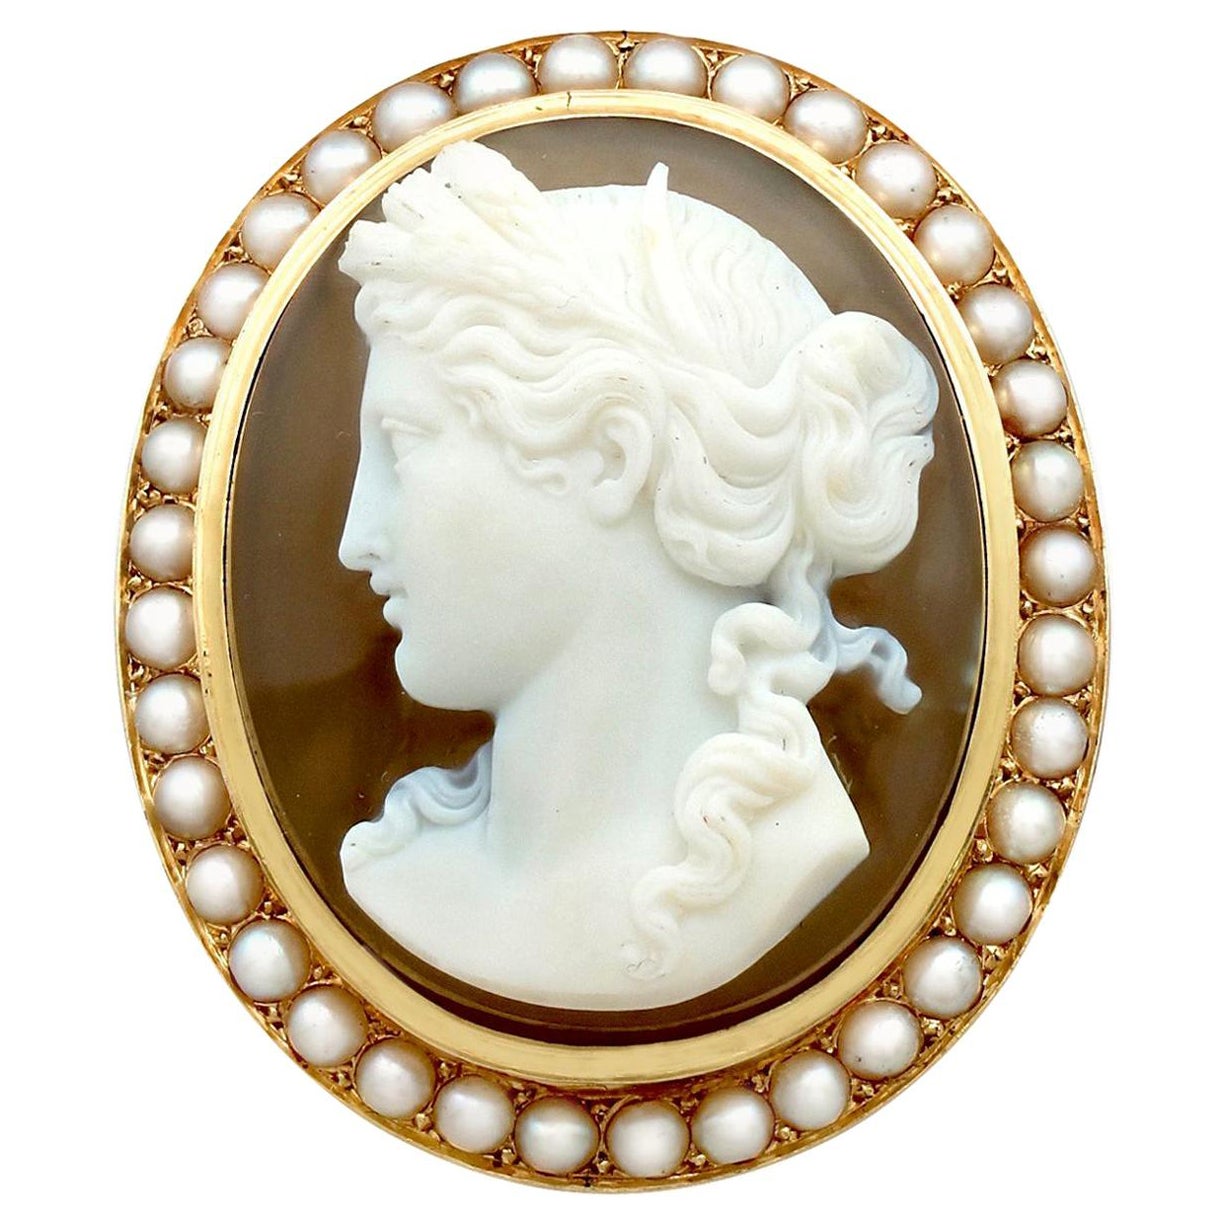 Details about   Agate Cameo Brooch Depicting Classical Female Figure Mounted in Rose Gold 